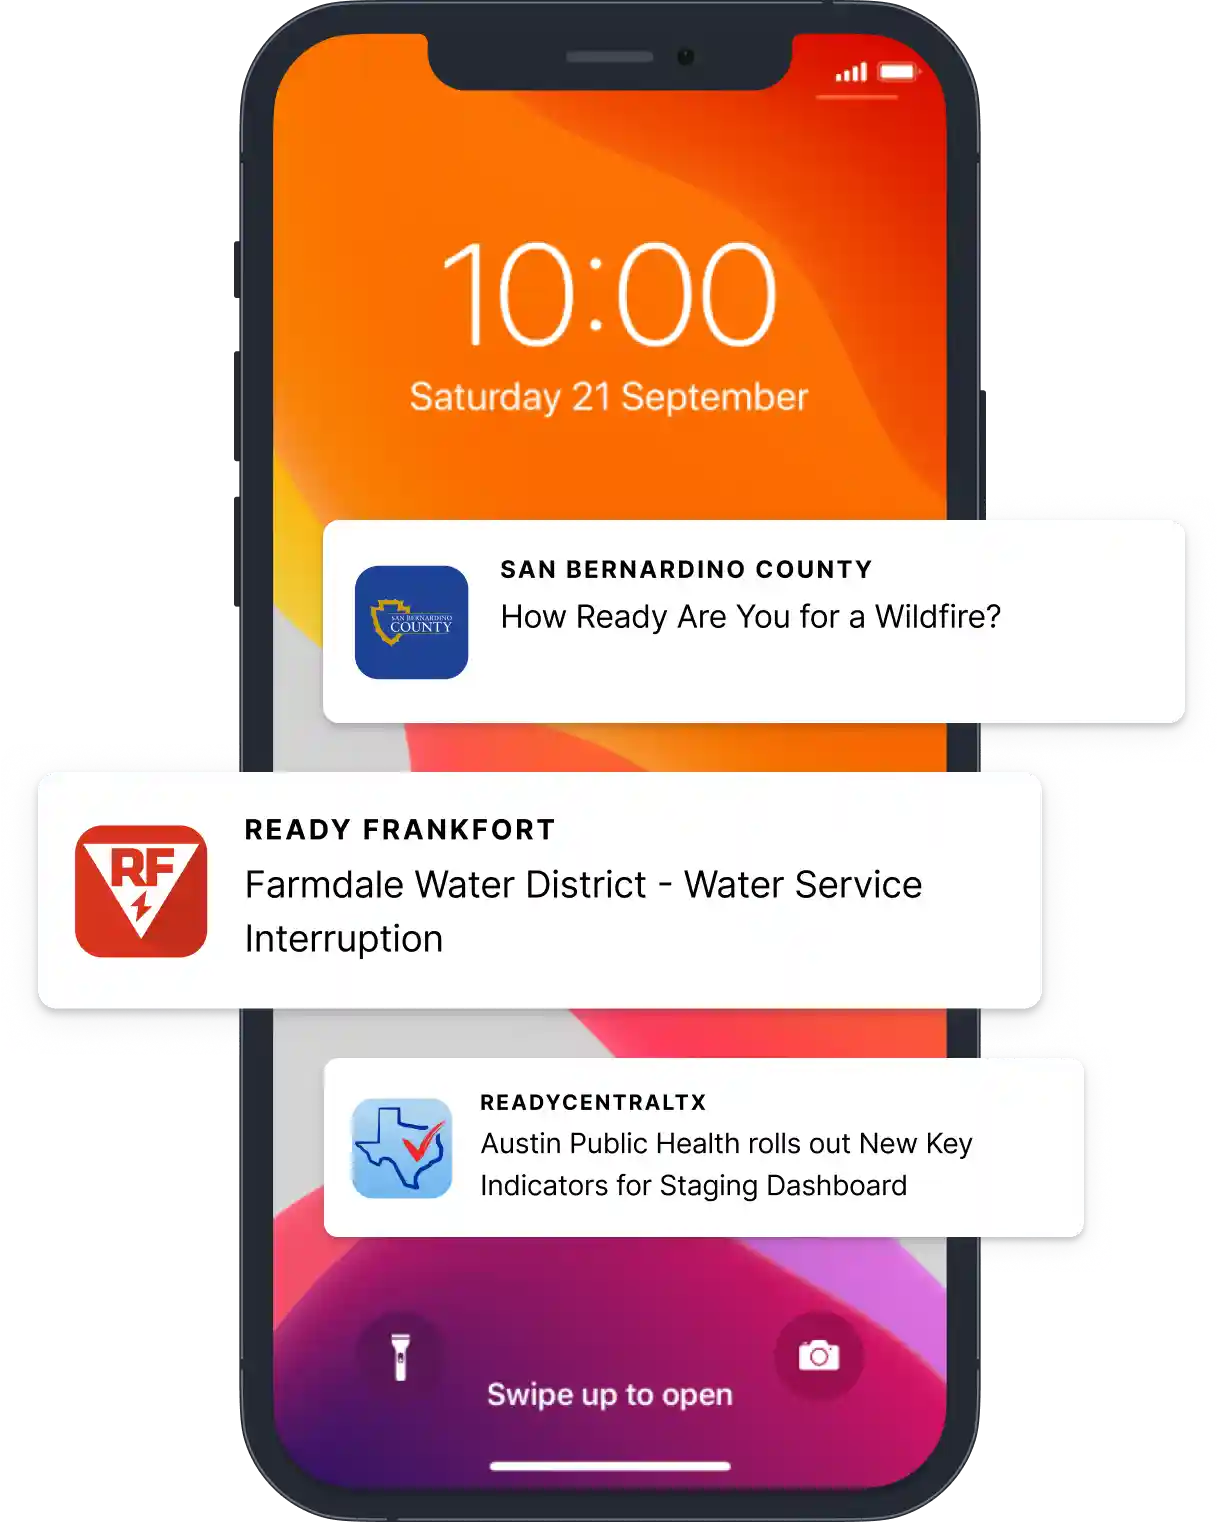 An apple smartphone with multiple push notifications standing out. They are alerting the owner to various emergencies from San Bernadino county, Ready Frankfort and Ready Maricopa